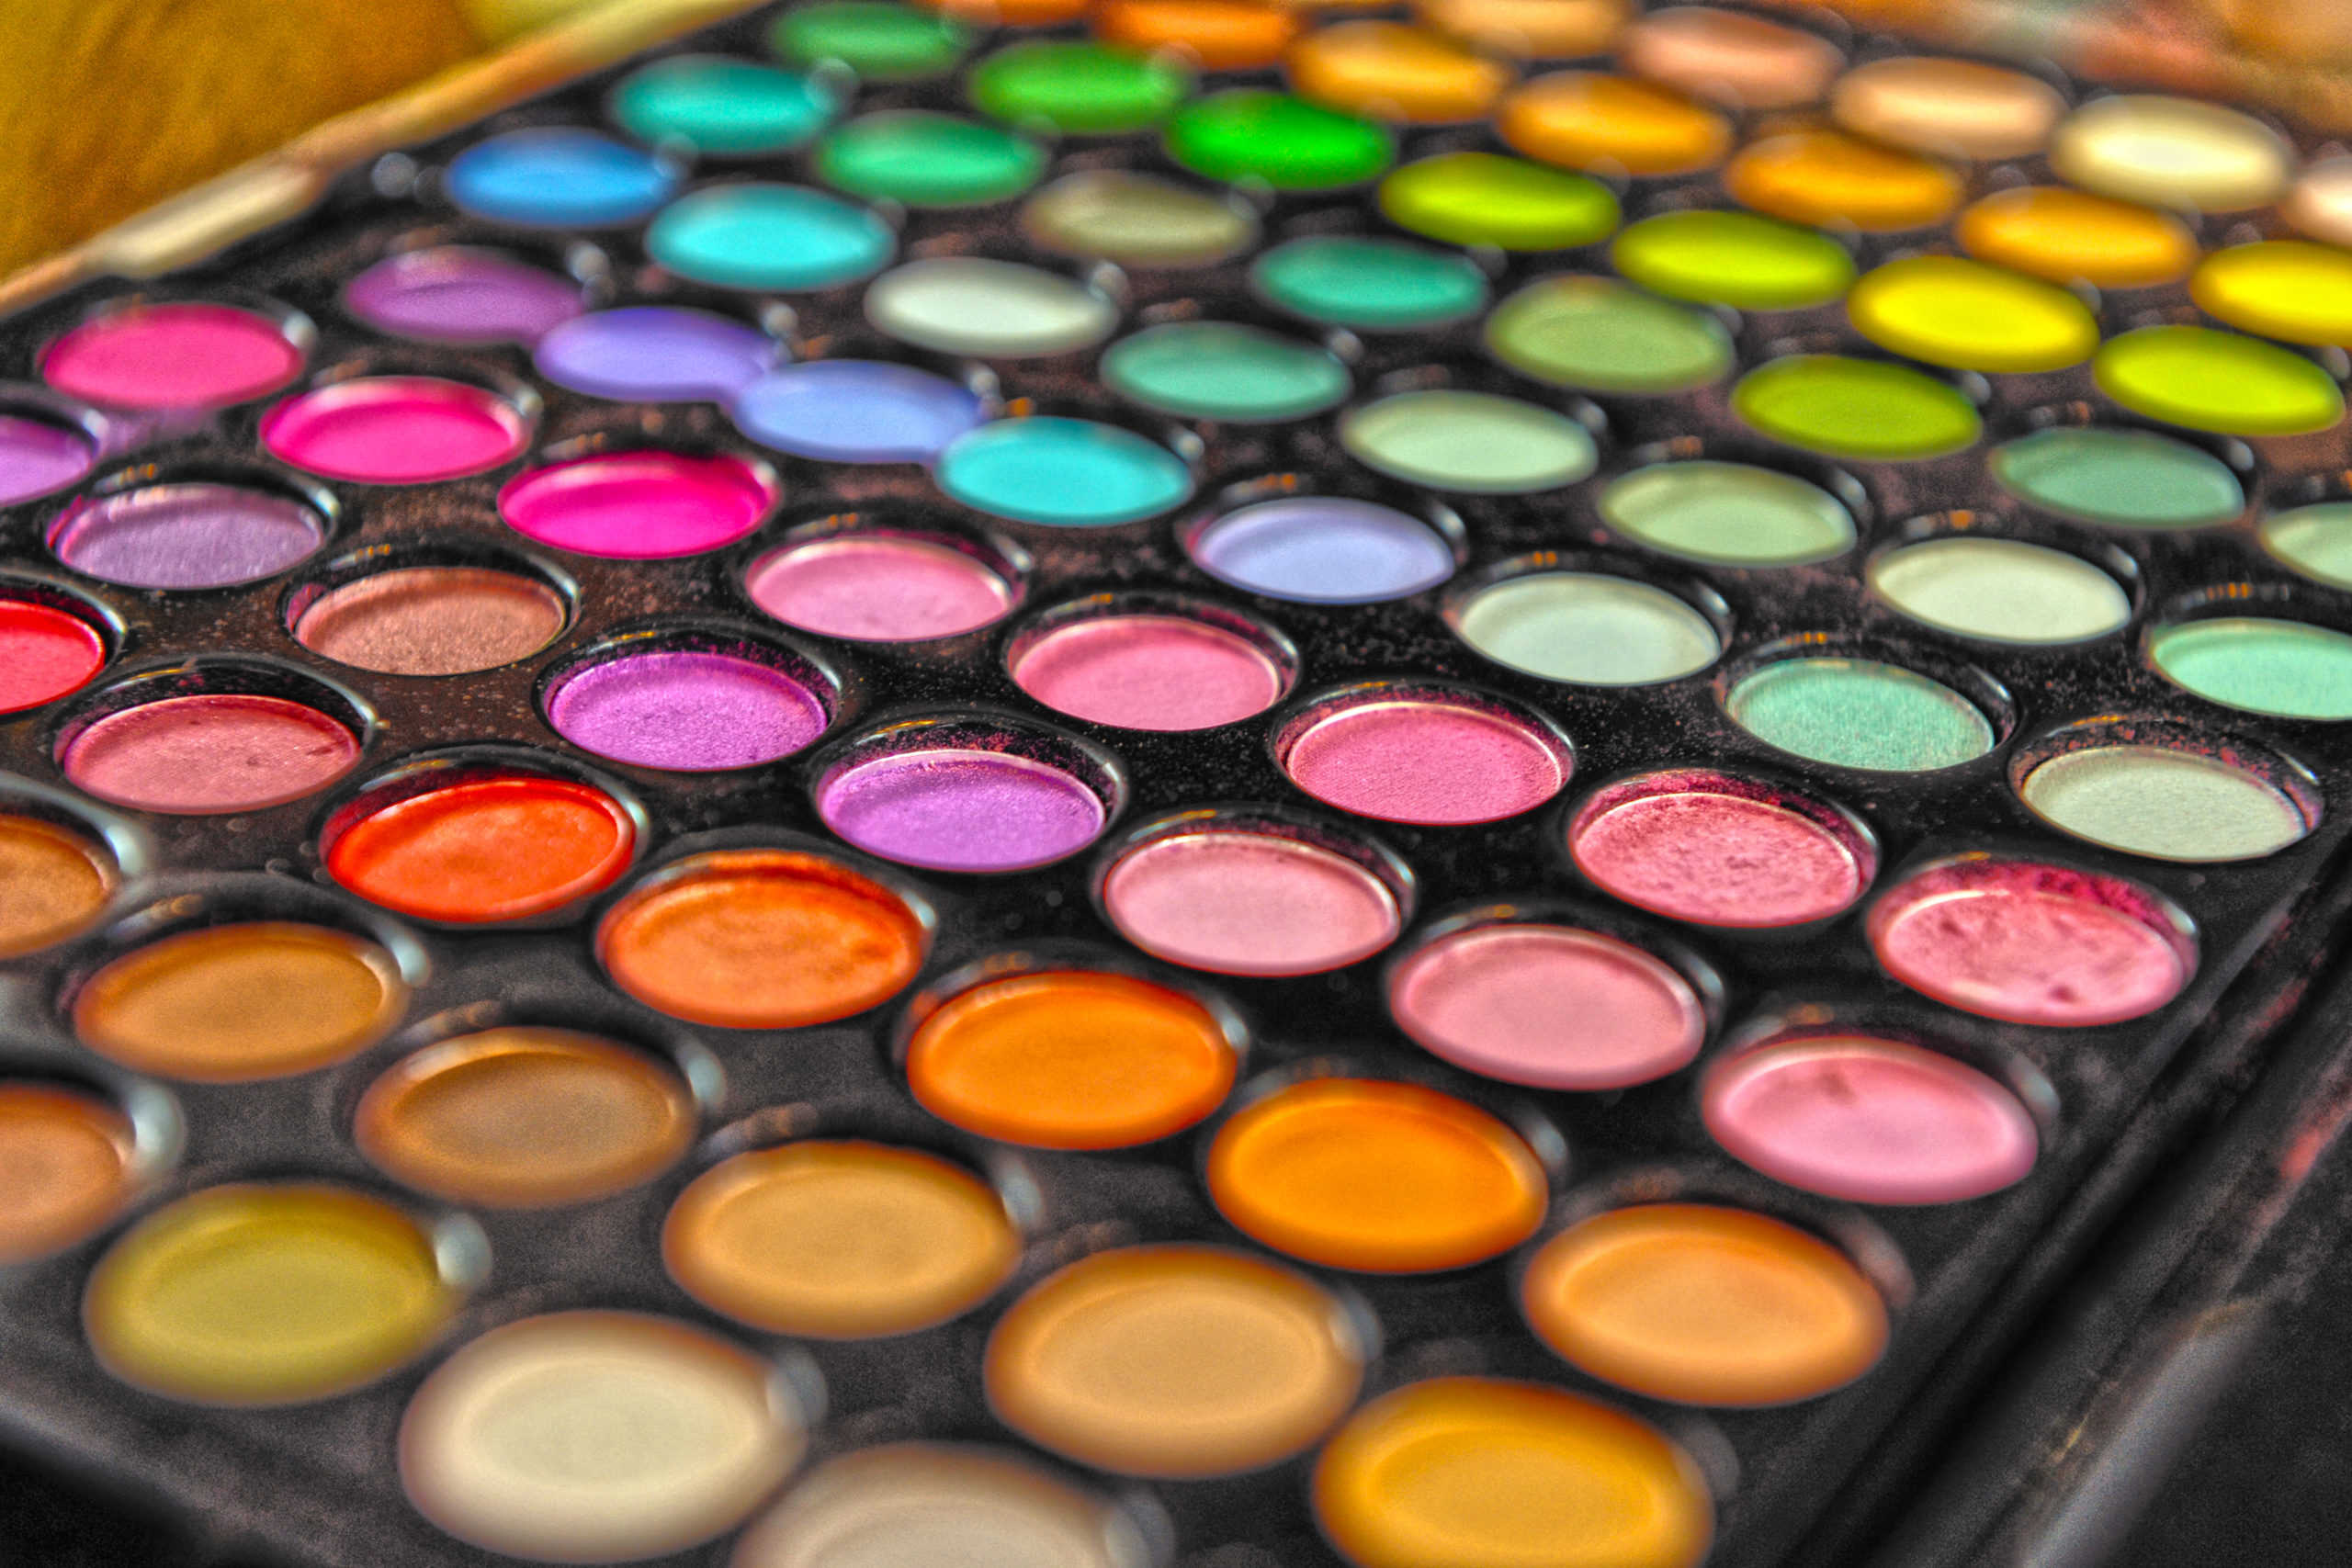 Cosmetics Sold in California are Set for a Face Lift